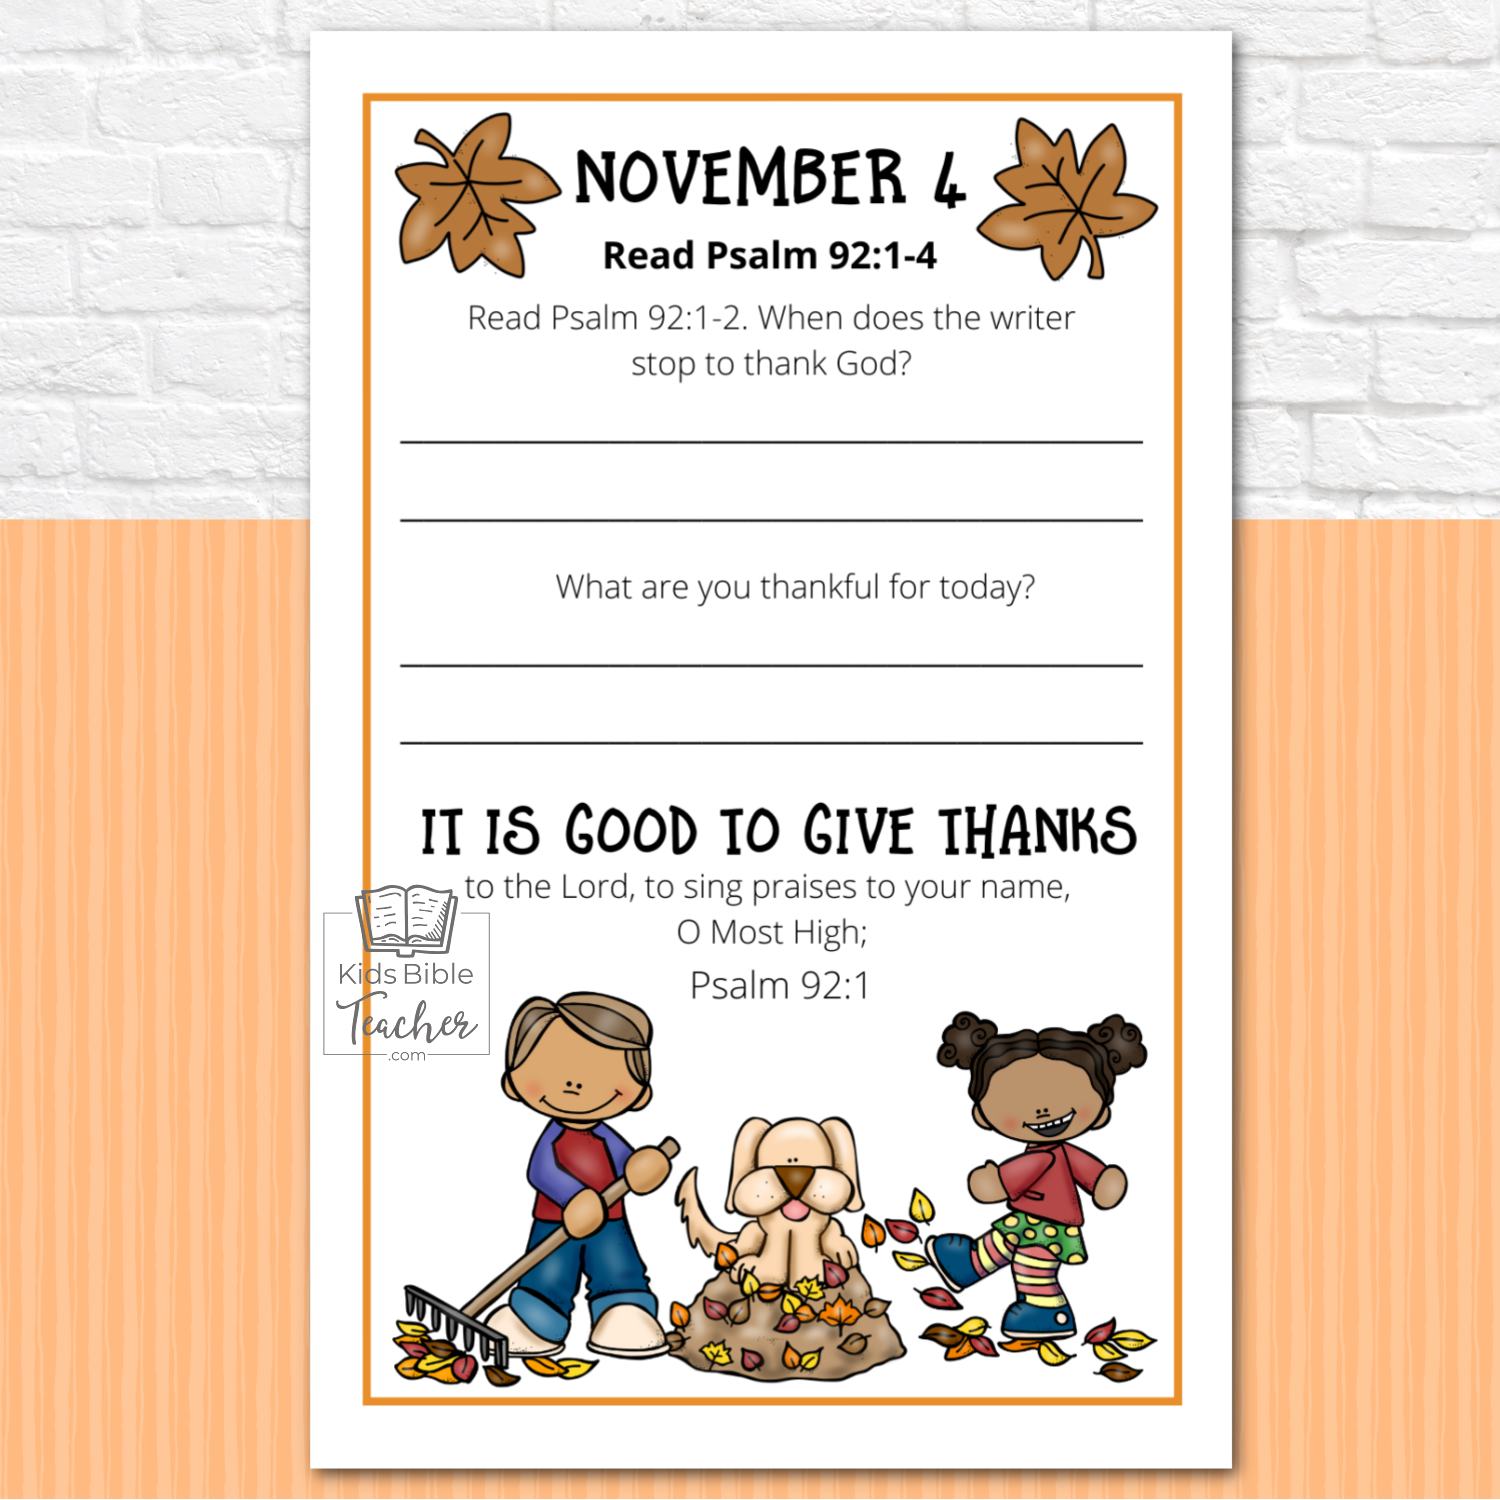 Gratitude Journal Pages with Thanksgiving Bible Verses, NOVEMBER Edition